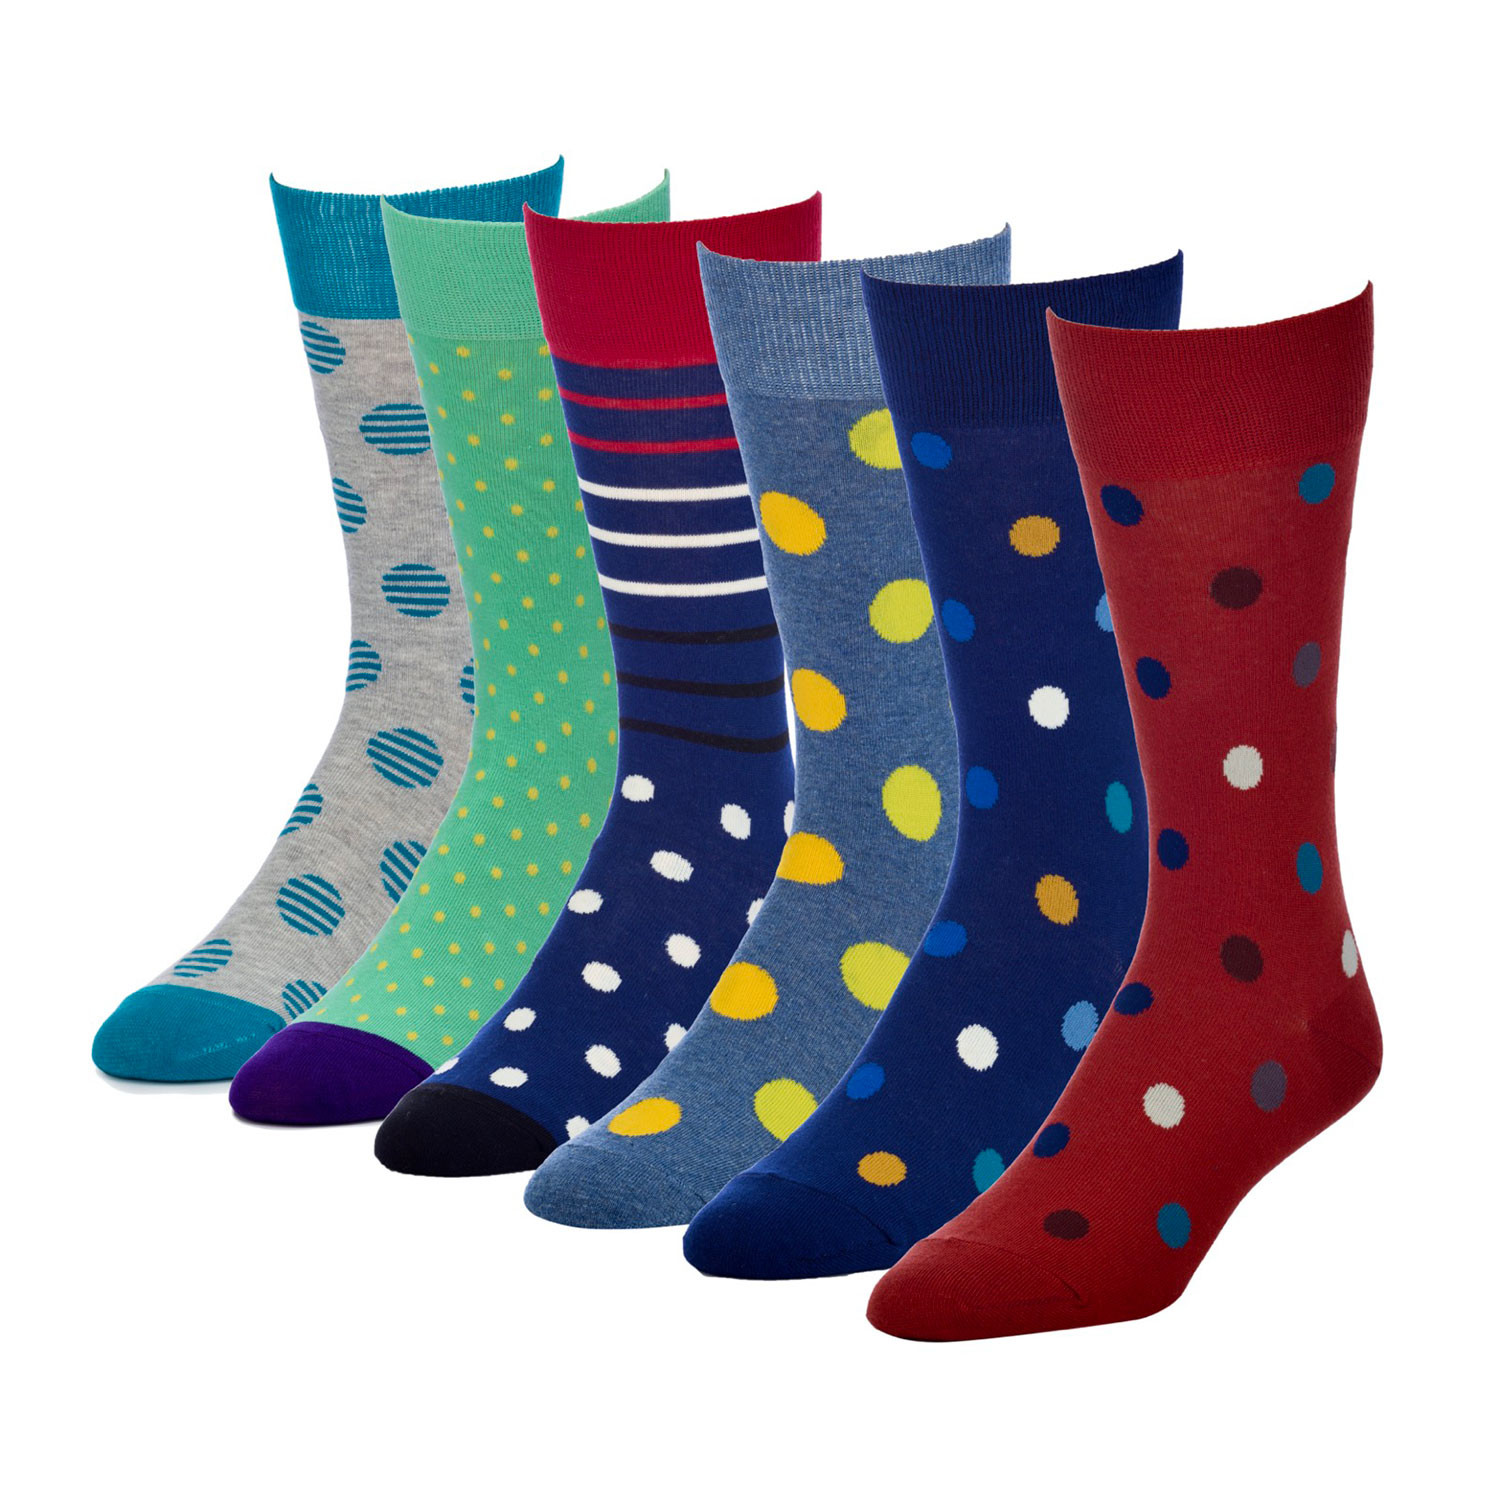 Charisma Modest Crew Sock // Pack of 6 - Strollegant - Touch of Modern